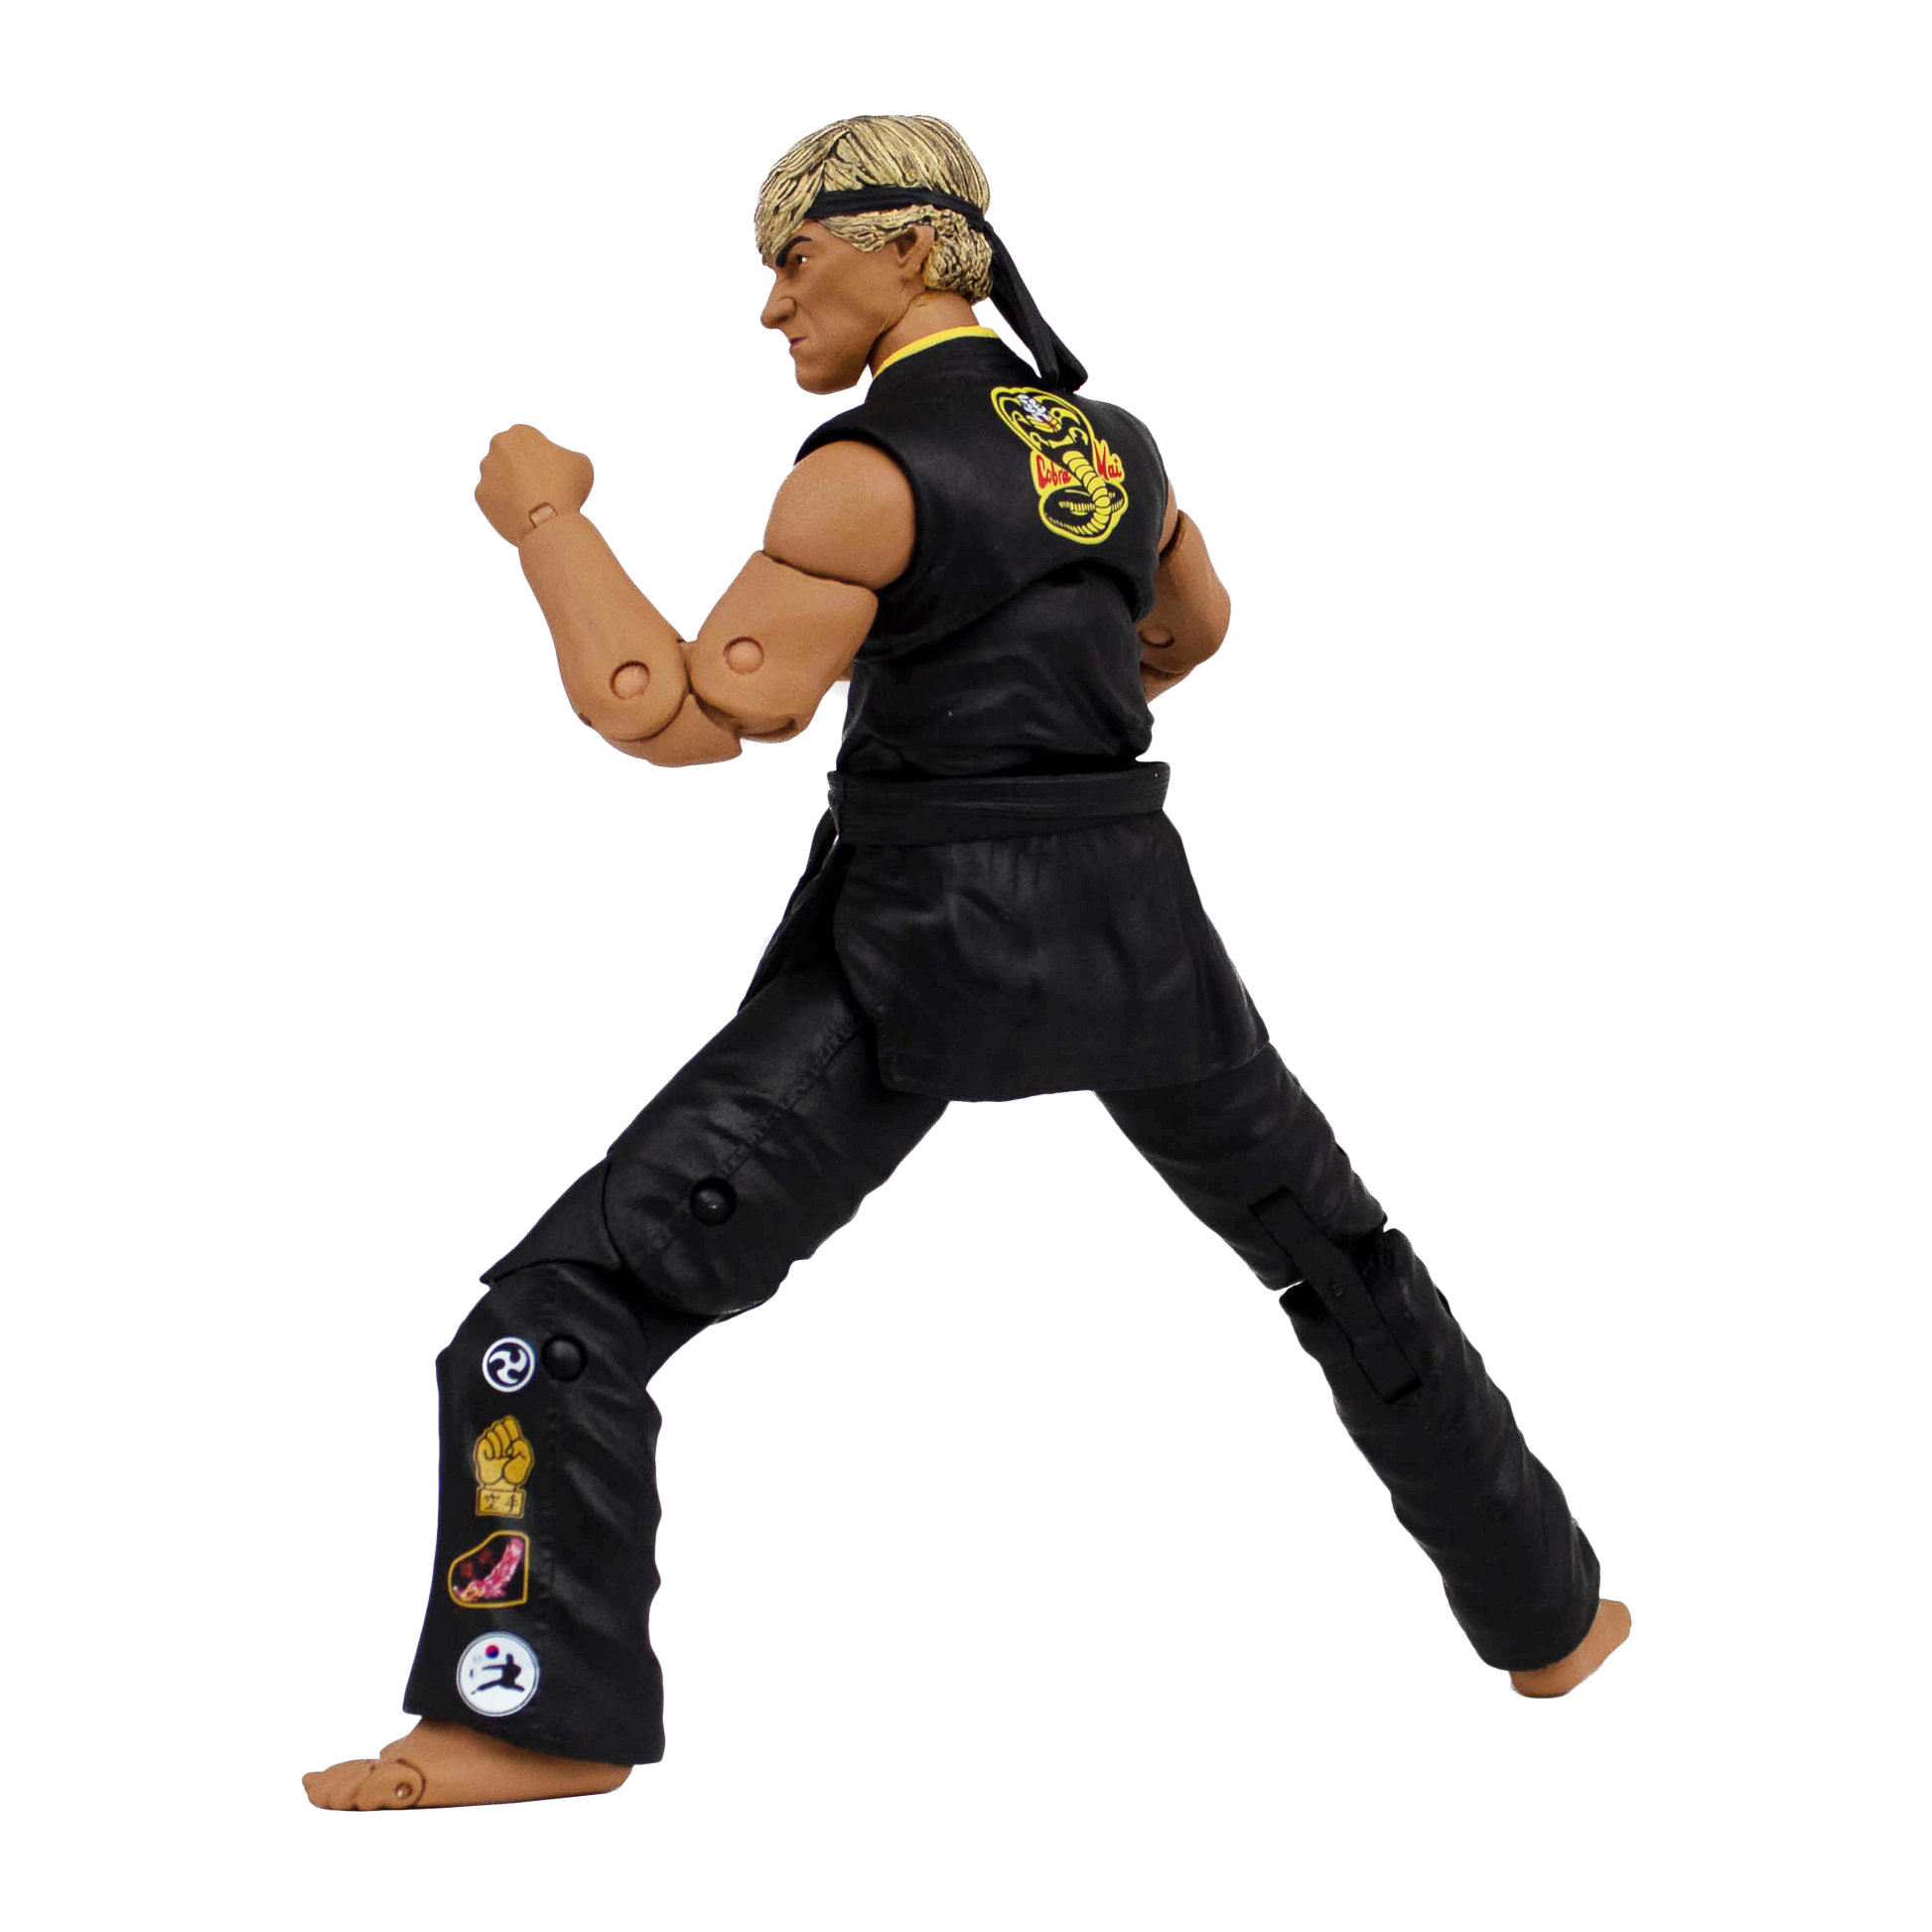 The Karate Kid Johnny Lawrence Action Figure - Available 3rd Quarter 2021 - Icon Heroes 